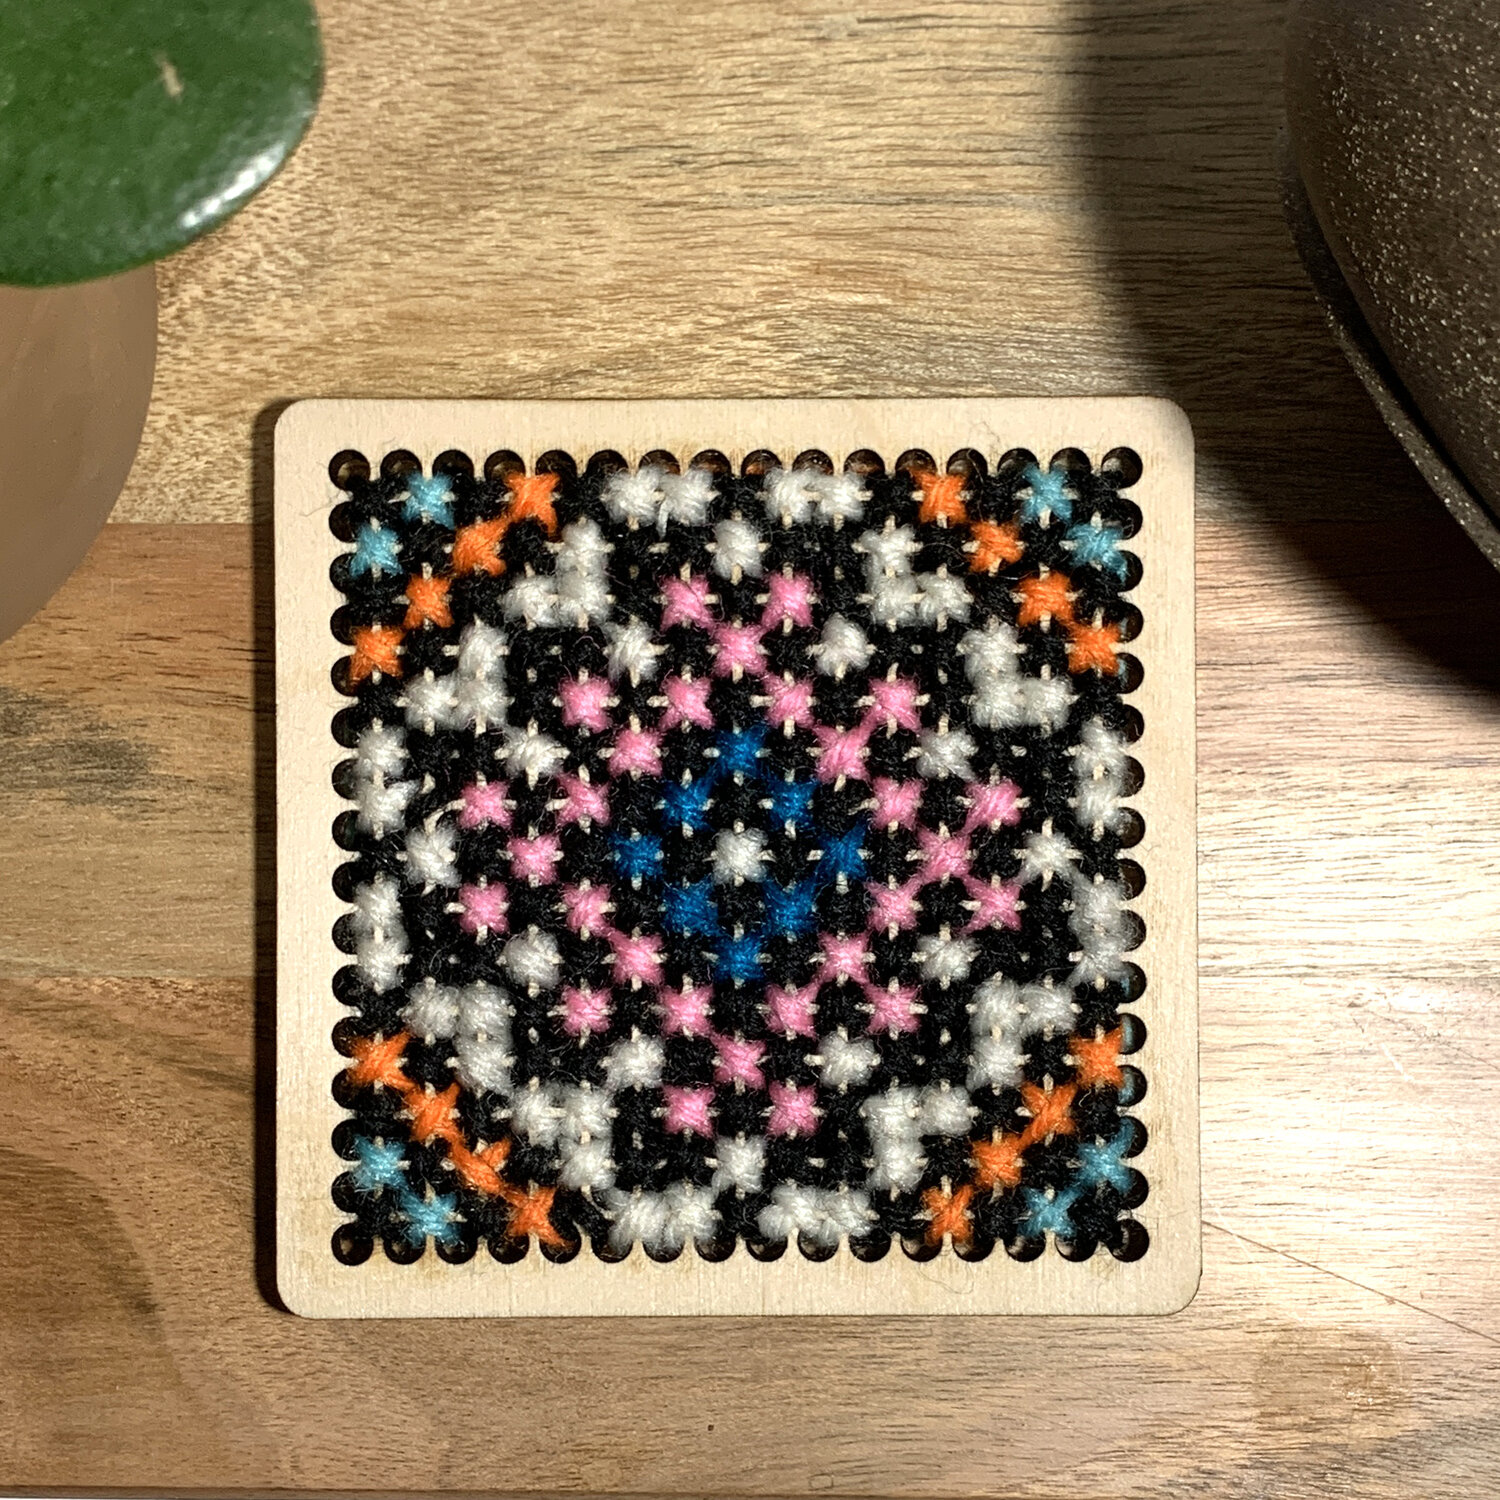 How to Cross-Stitch with Patterns: DIY Chevron Coasters